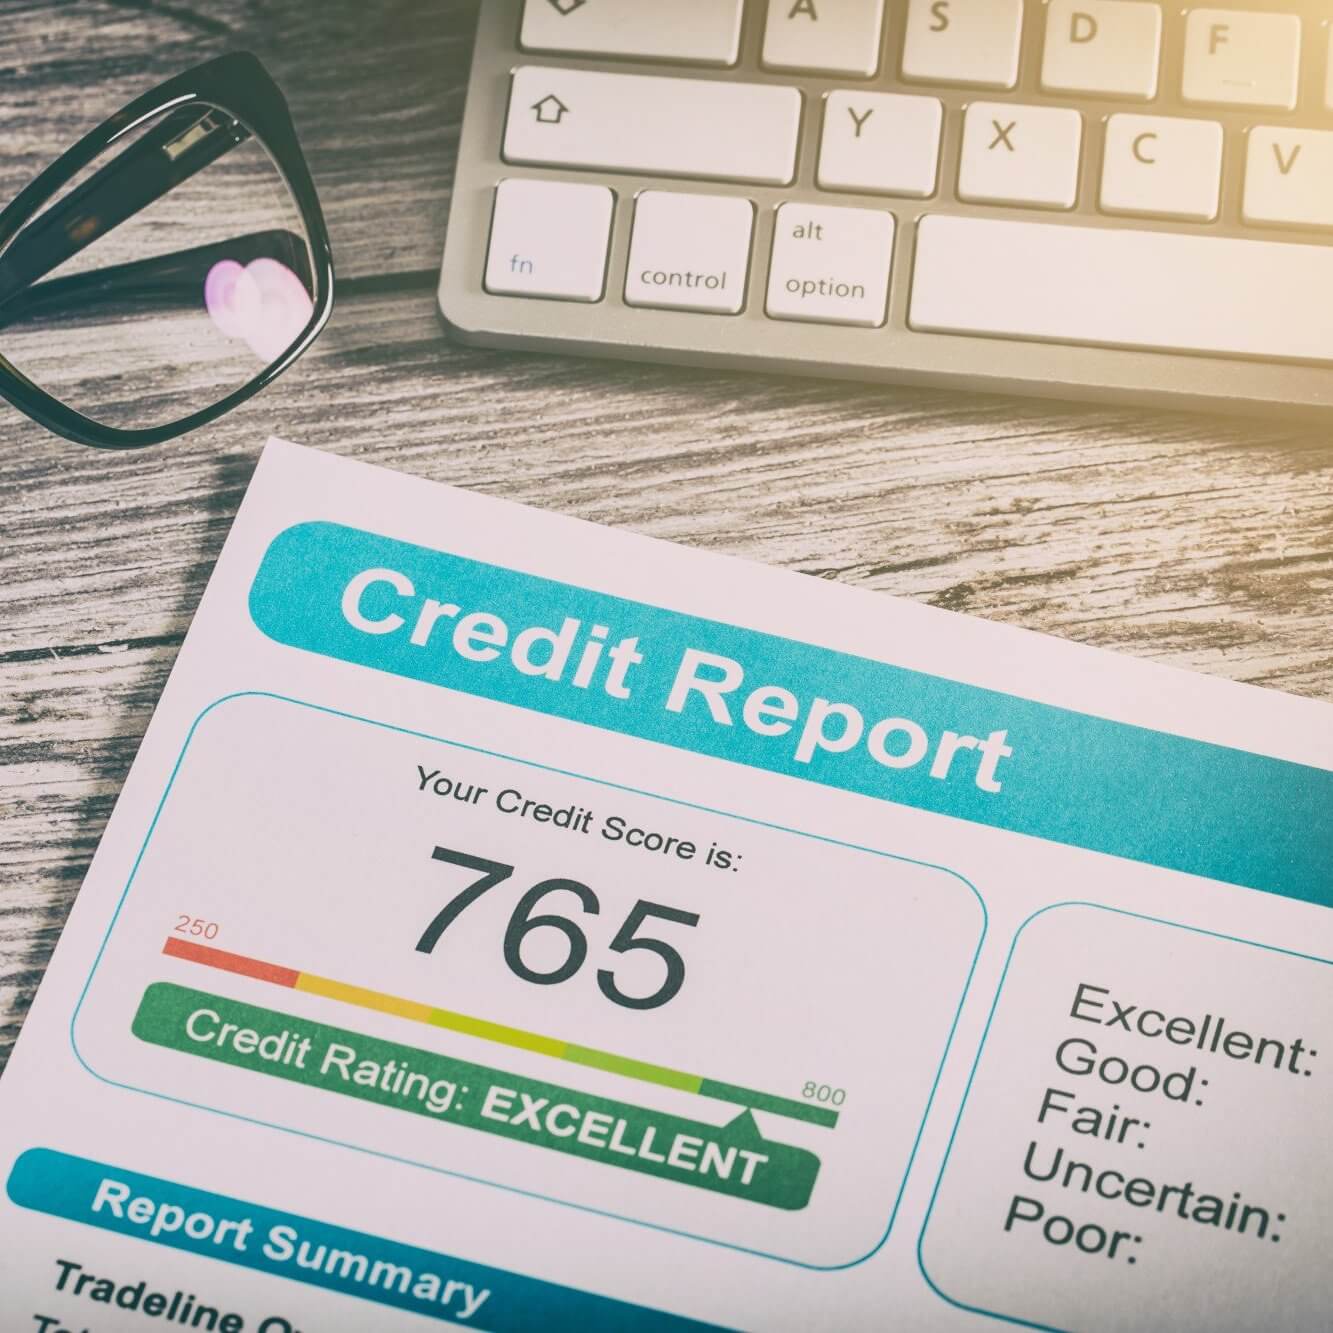 Check My Credit Score Free, Quick and Easy Steps September 2020